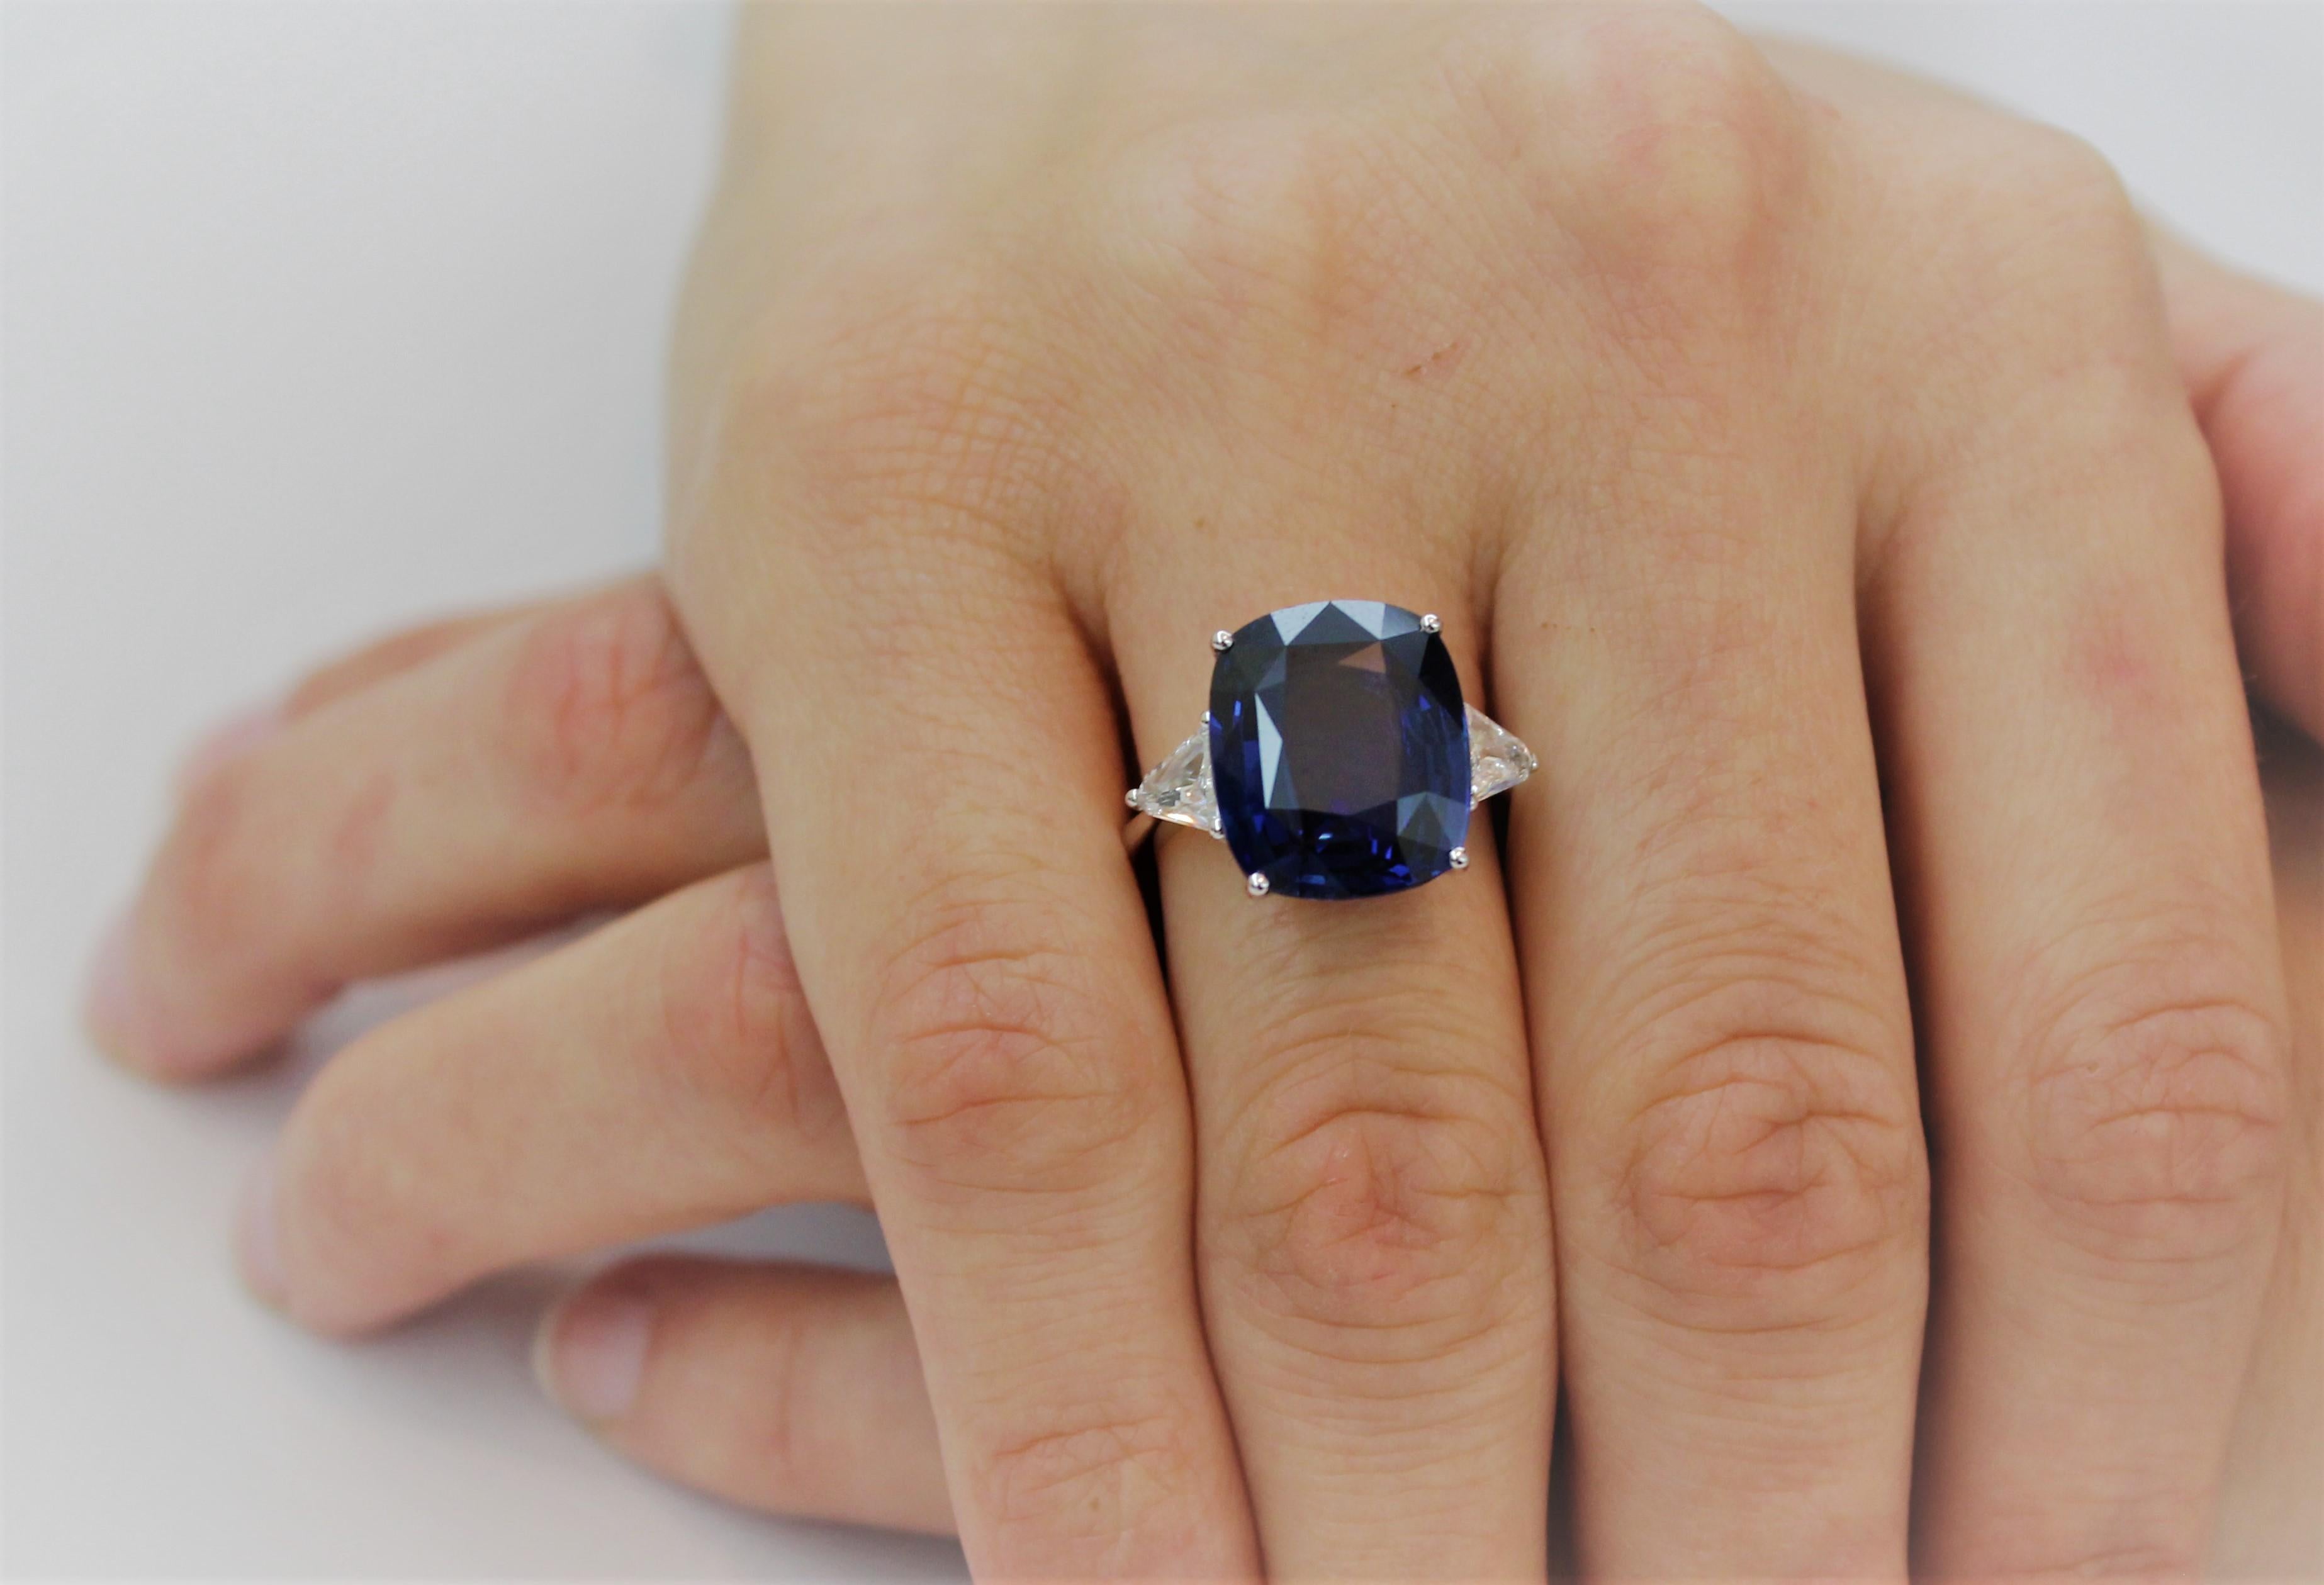 Entirely Hand-Made in Italy 14.30 Carat Cushion Blue Sapphire Engagement Ring.
The Vibrant Blue of the Sapphire is enhanced by 2 White Trillon Diamonds of 0.74 Carat total on the side.
